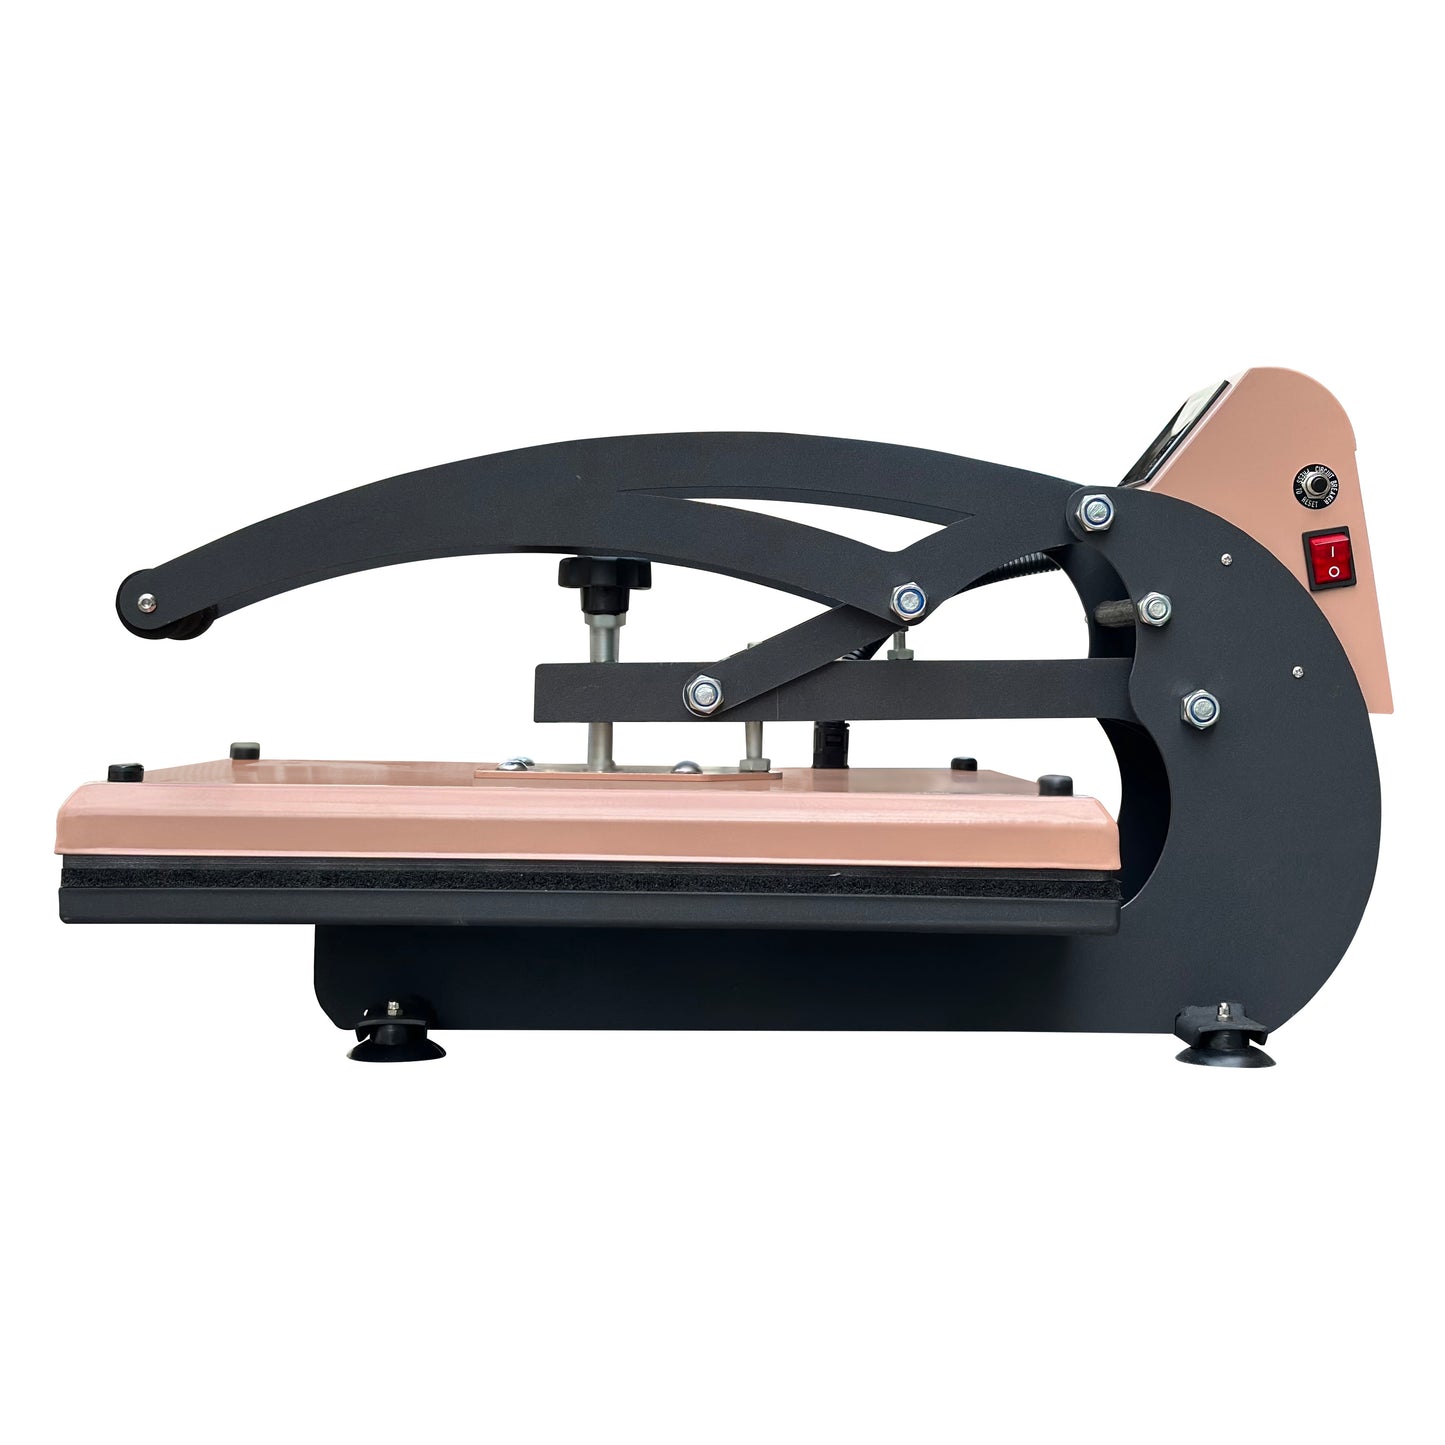 Manual Heat Press 16" x 20" IN STORE AVAILABLE